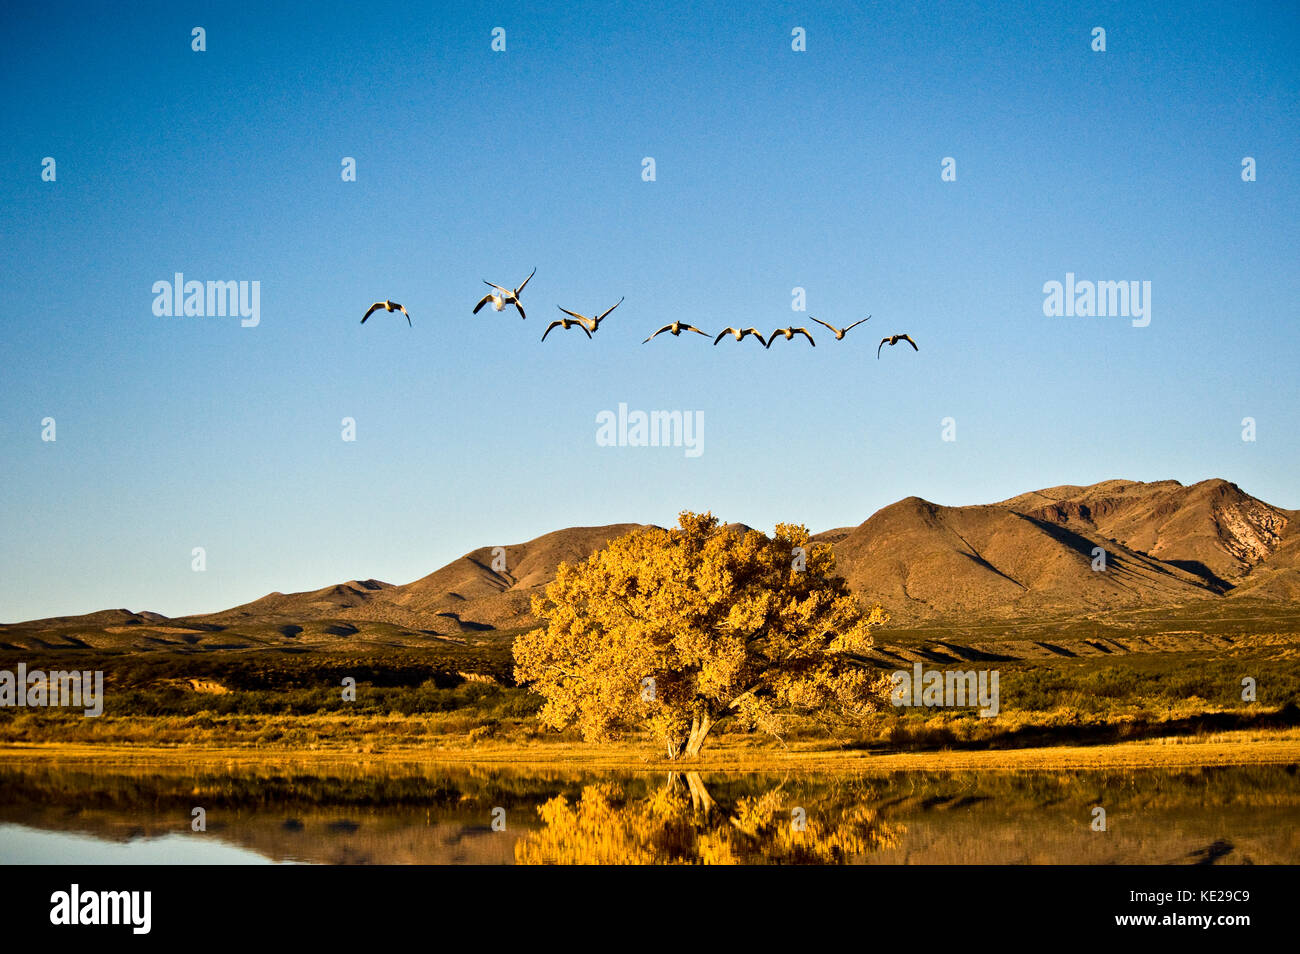 SNOW GEESE IN FLIGHT WITH GOLDEN TREE AND MOUNTAIN REFLECTING IN WATER Stock Photo